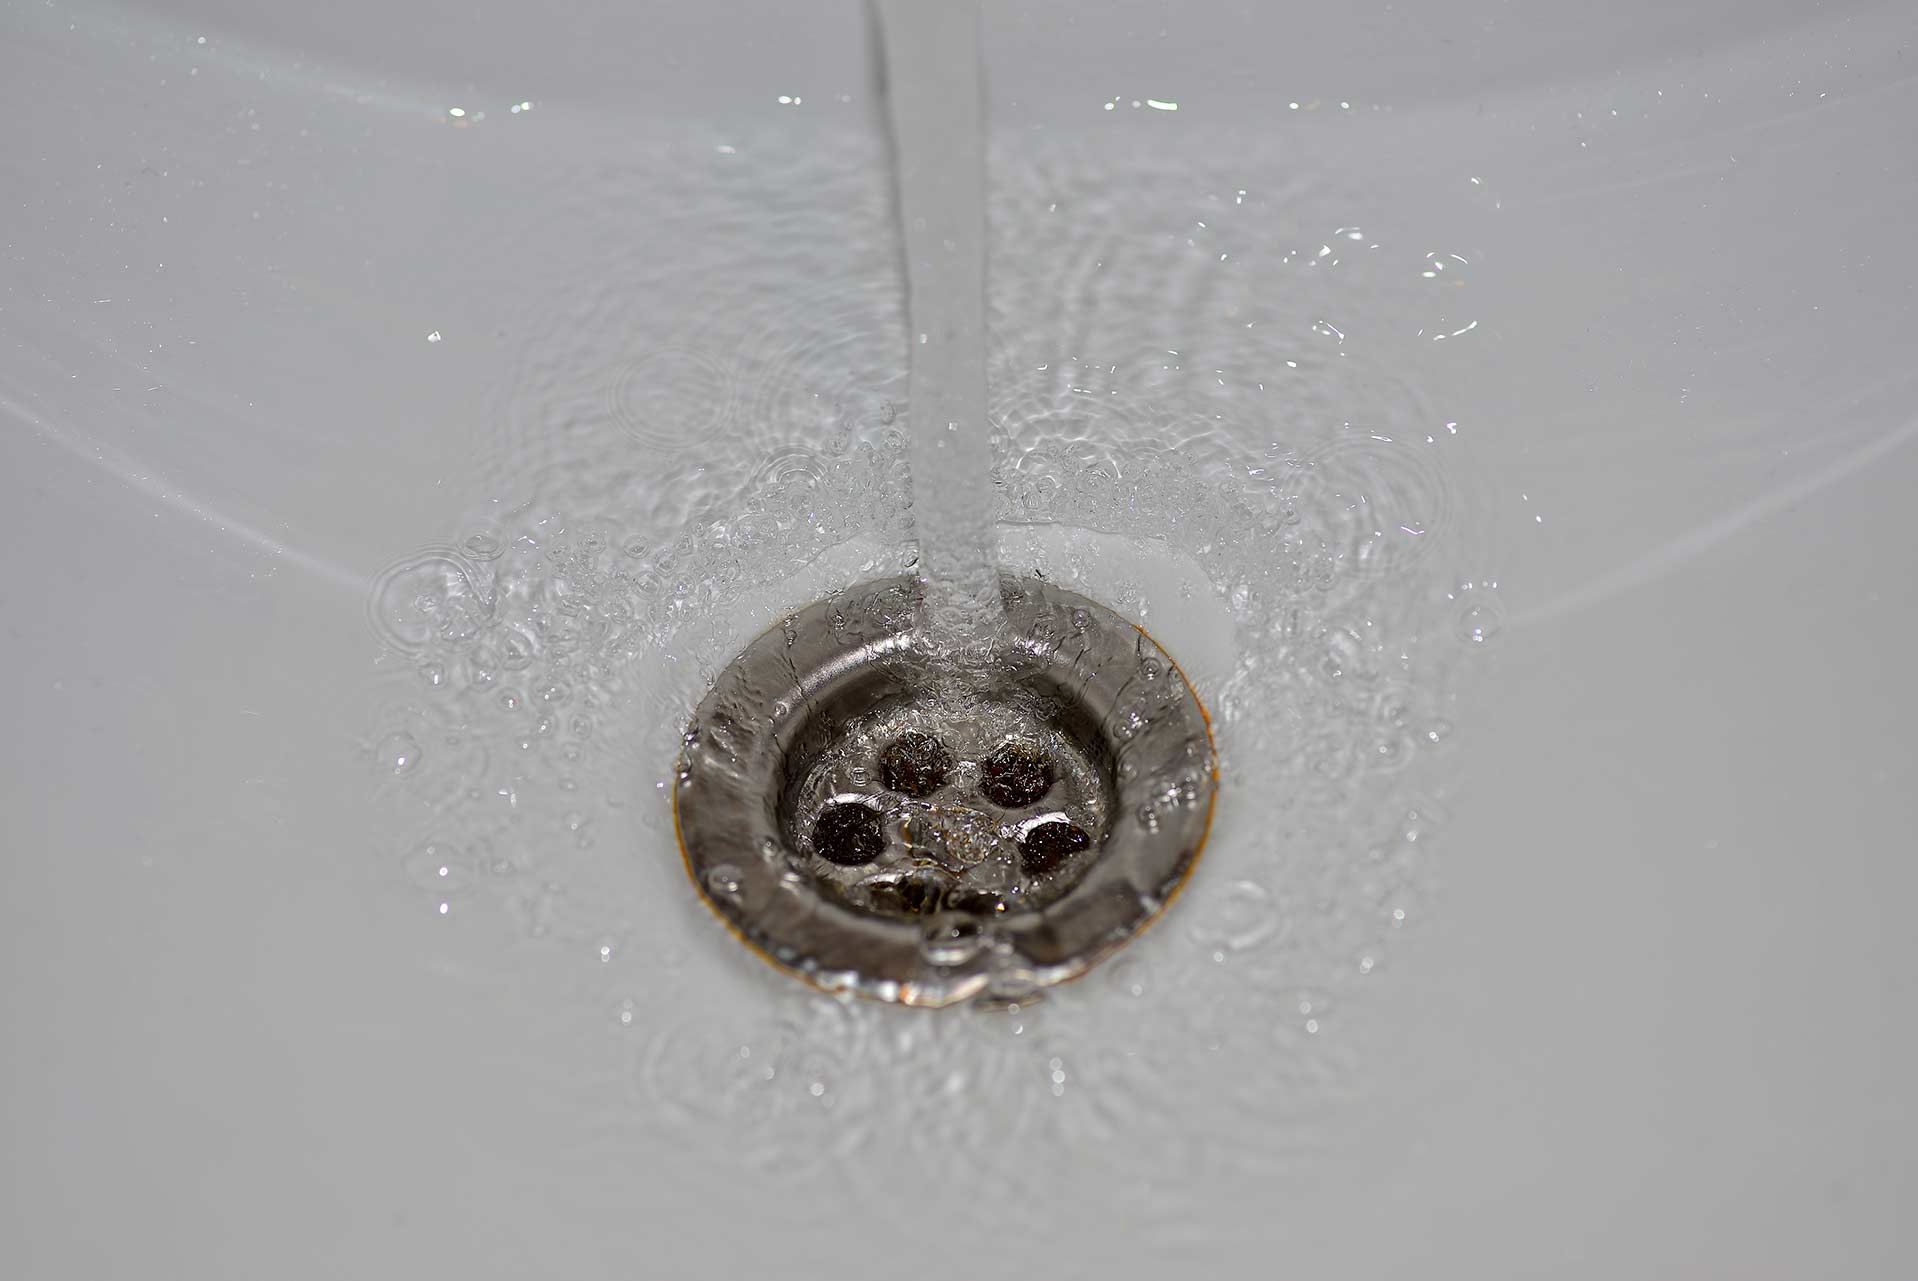 A2B Drains provides services to unblock blocked sinks and drains for properties in Maidstone.